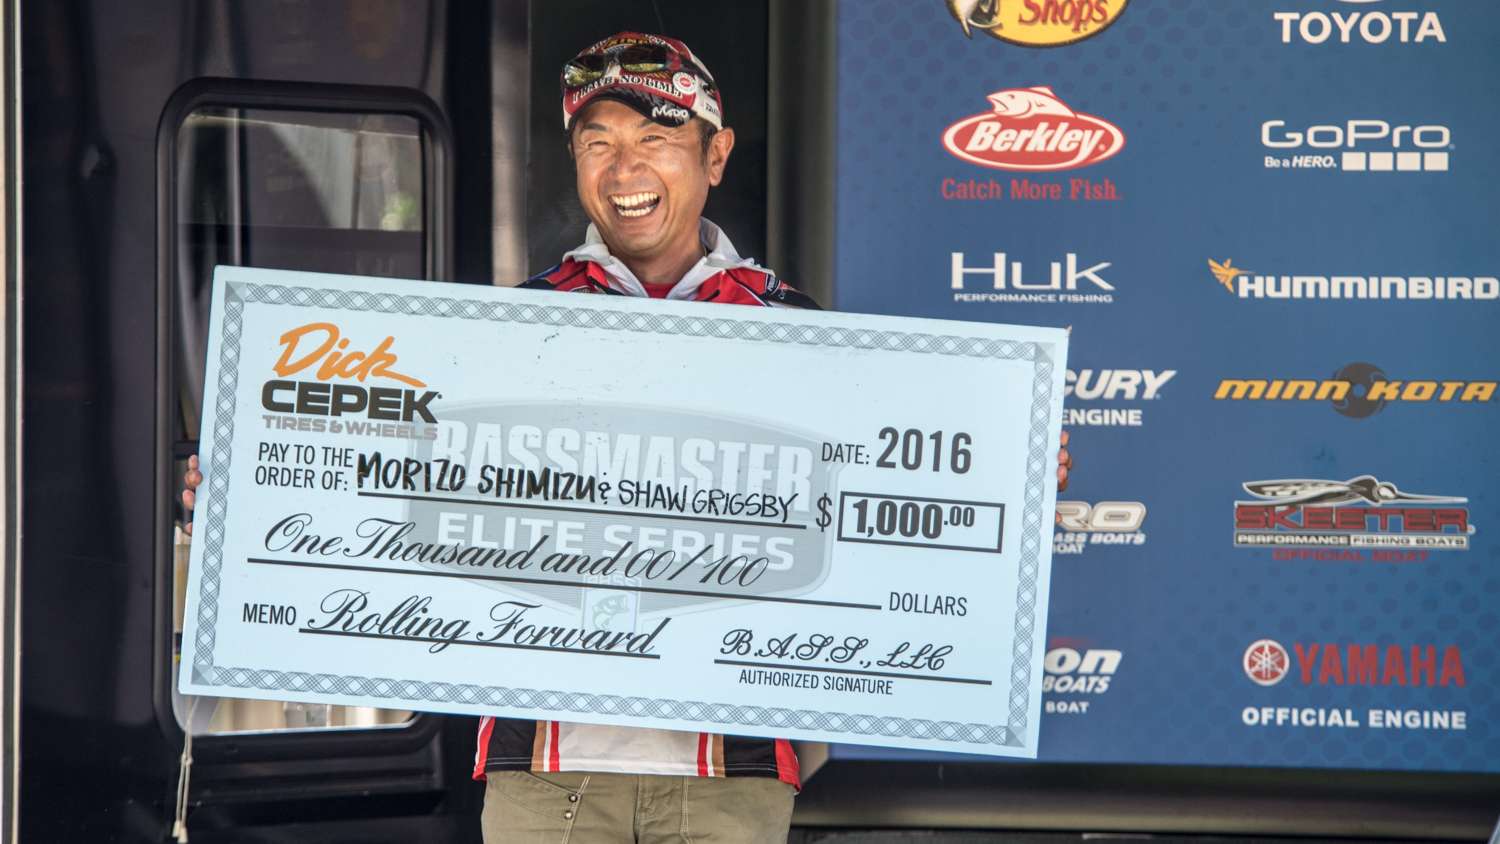 Shimizu got another check from Dick Cepek Tires and Wheels.